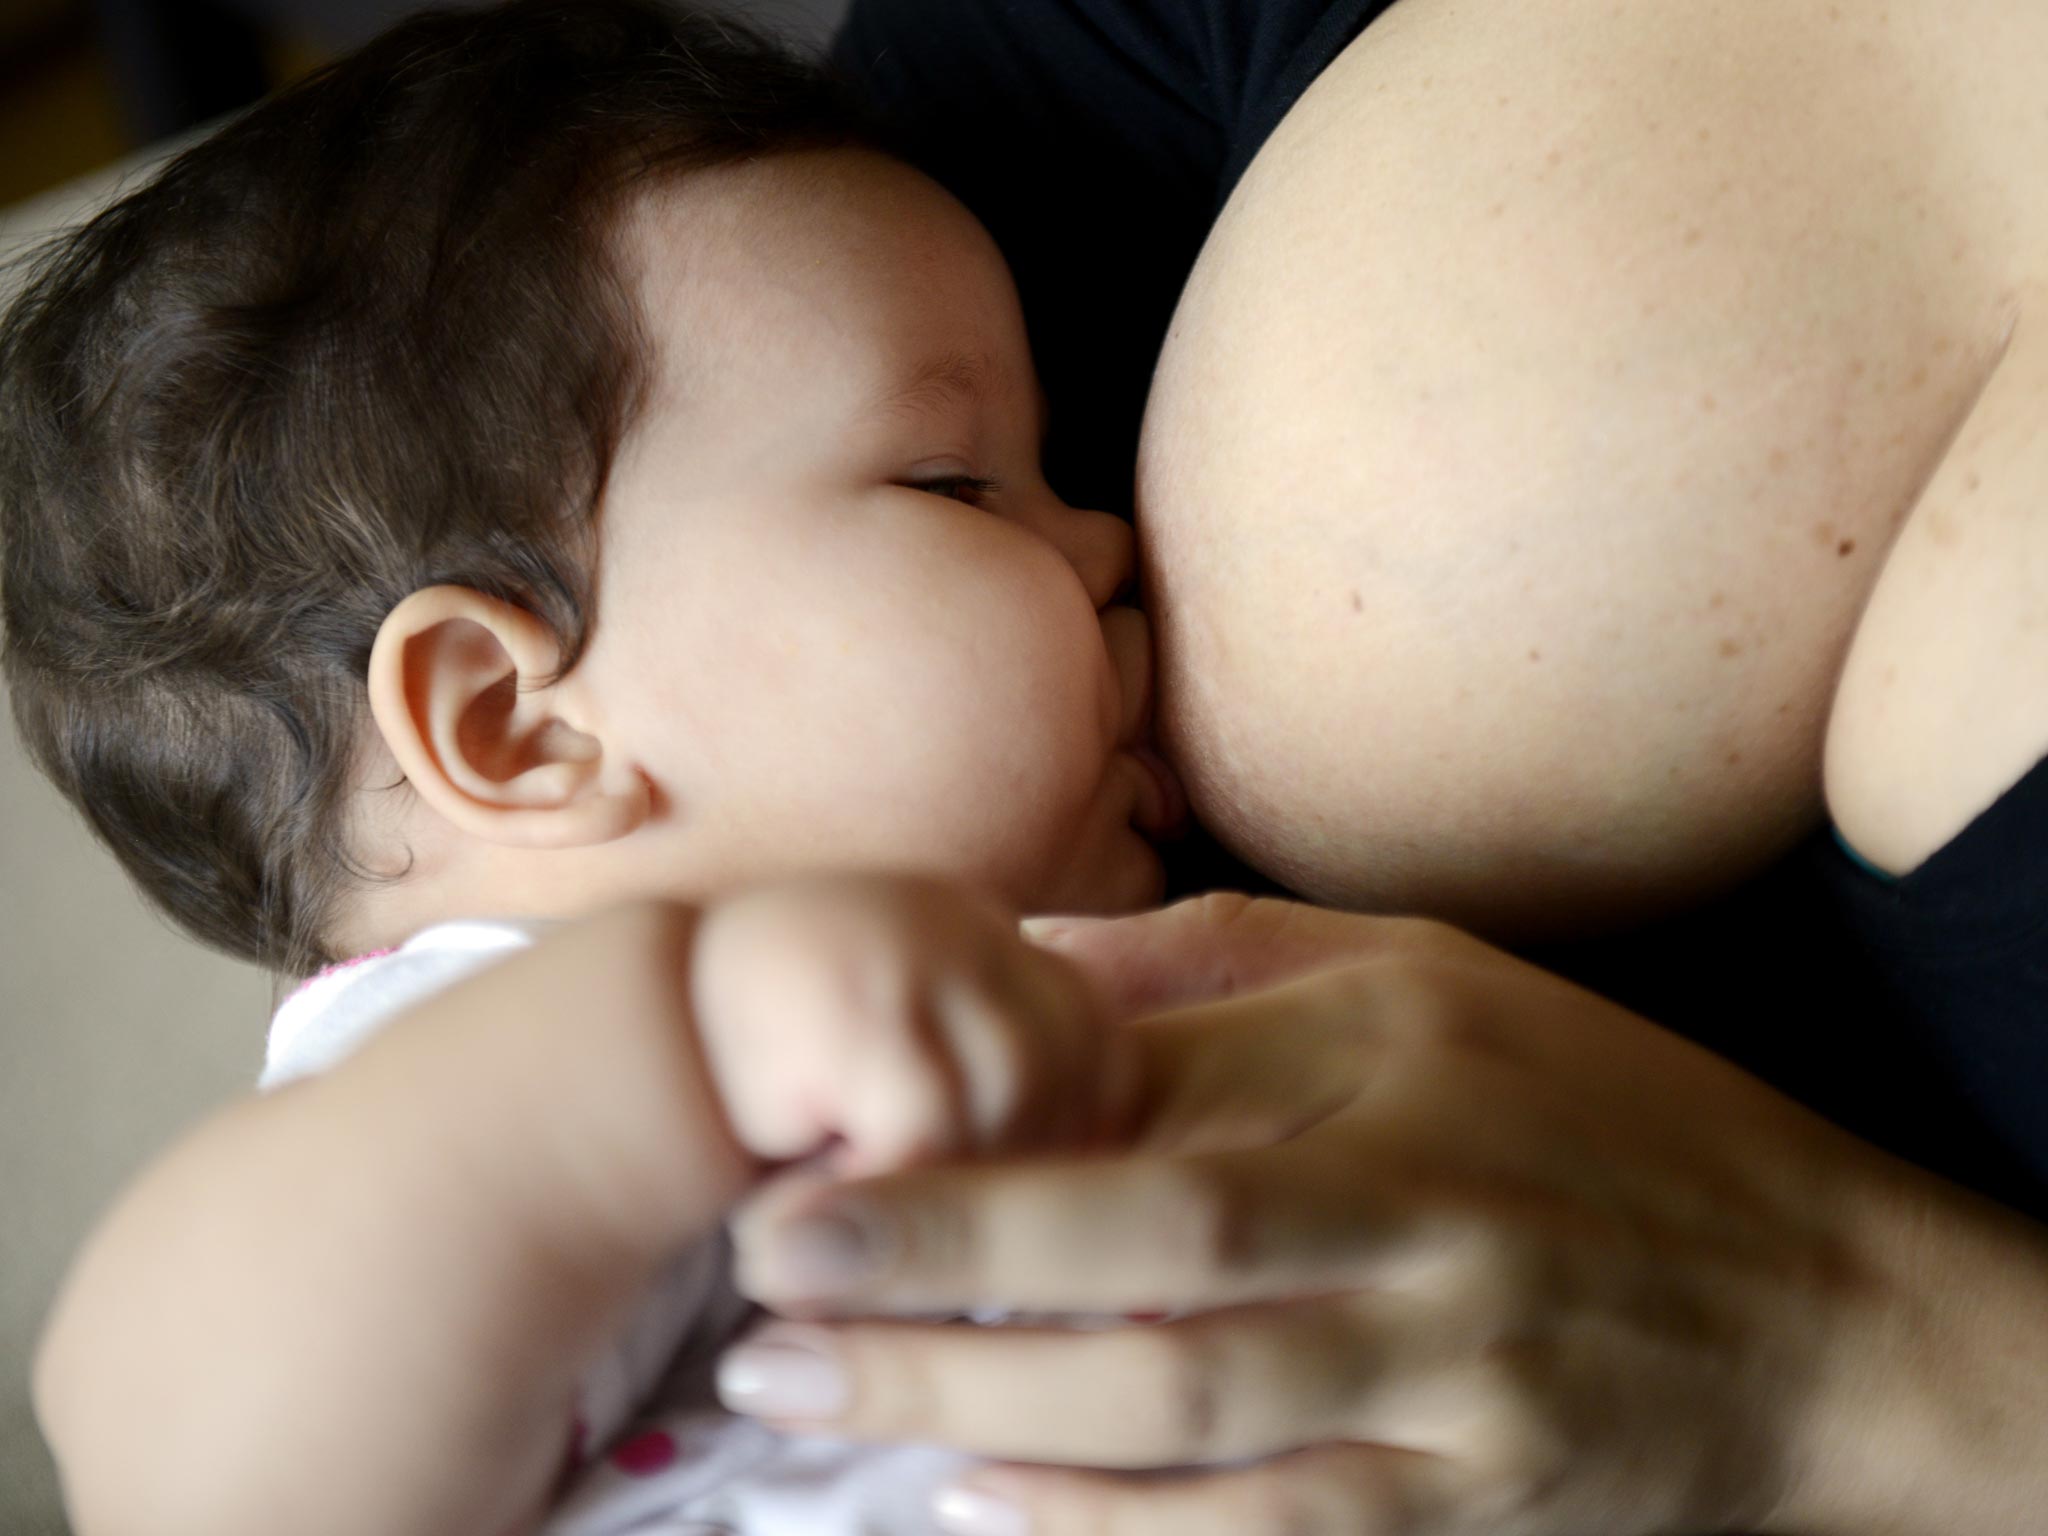 File image: US laws protect a mother's right to breastfeed in public, with or without covering up